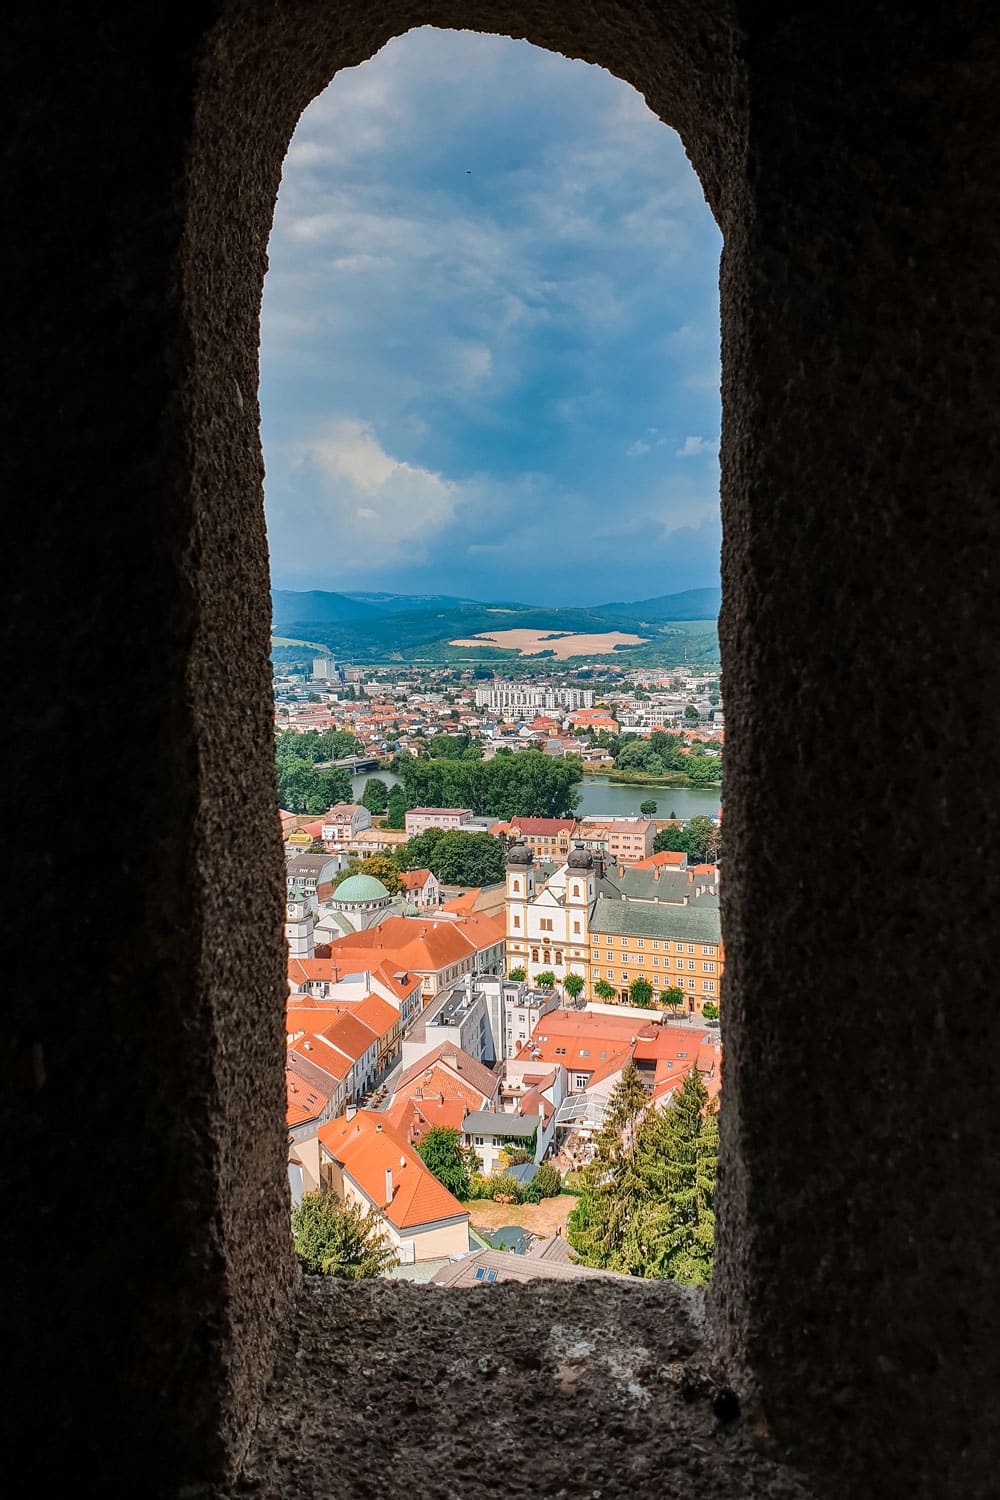 View through Medieval window to Trencin town